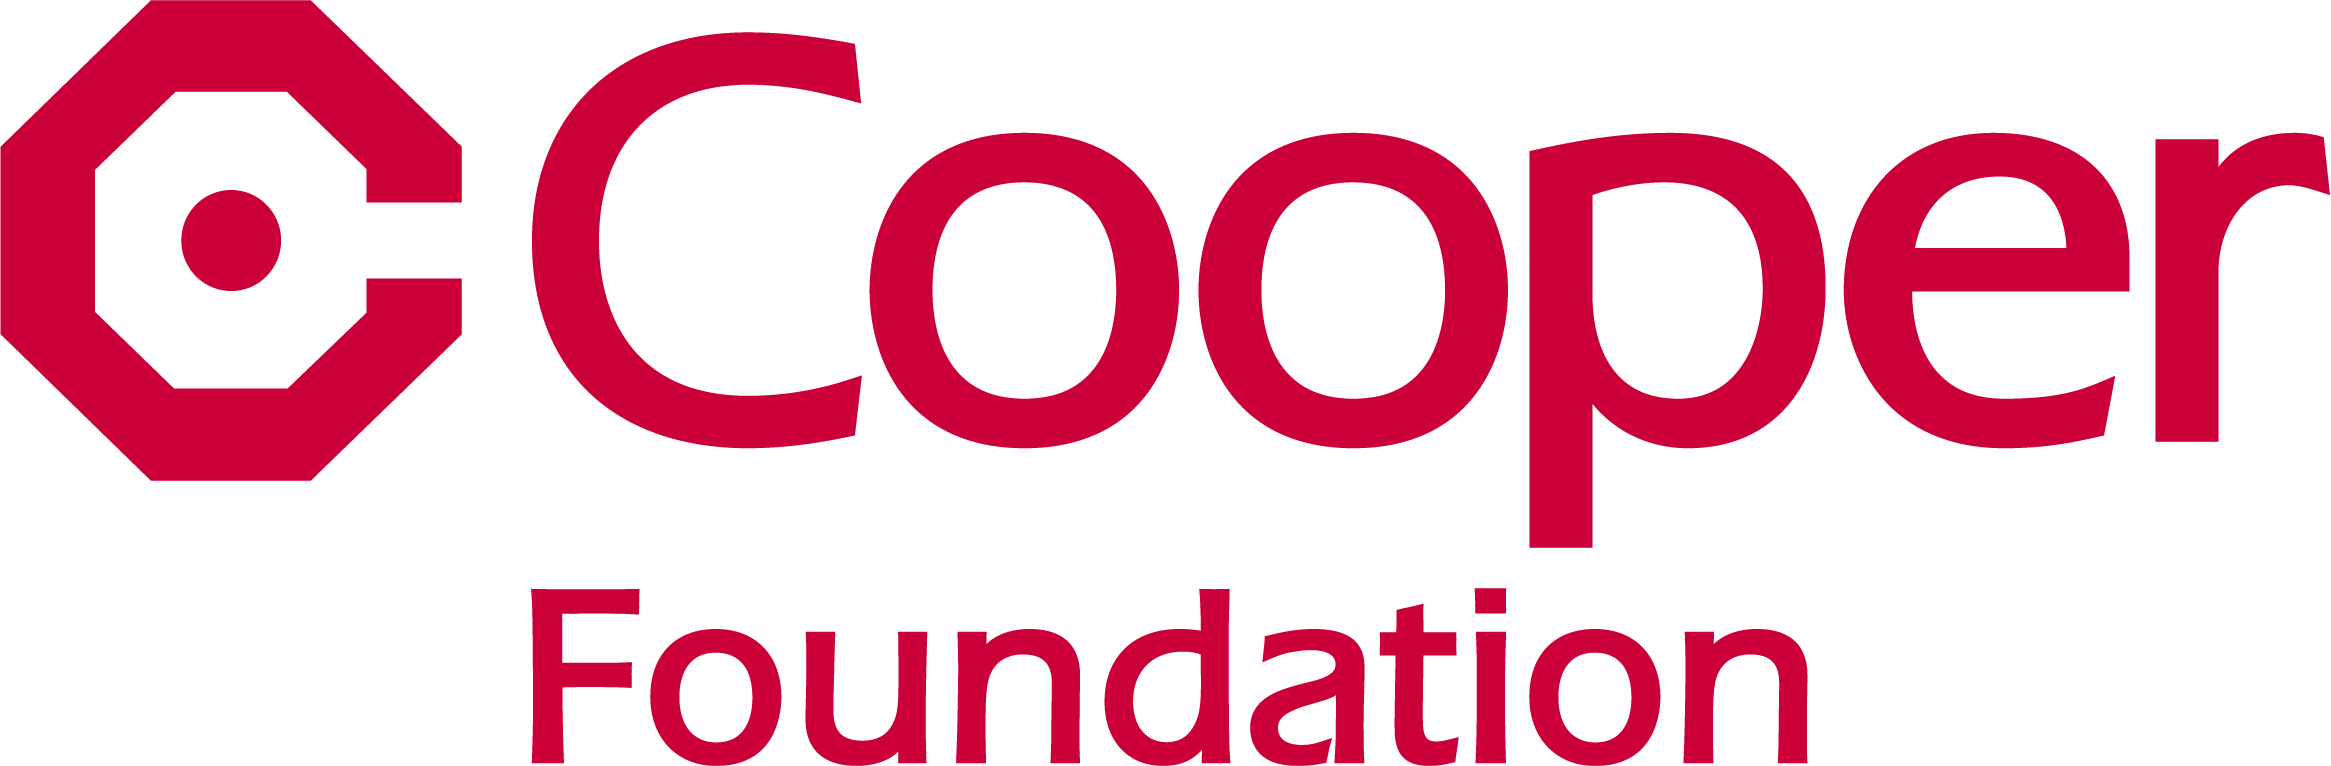 Typographic logo in red on a white background for Cooper Foundation